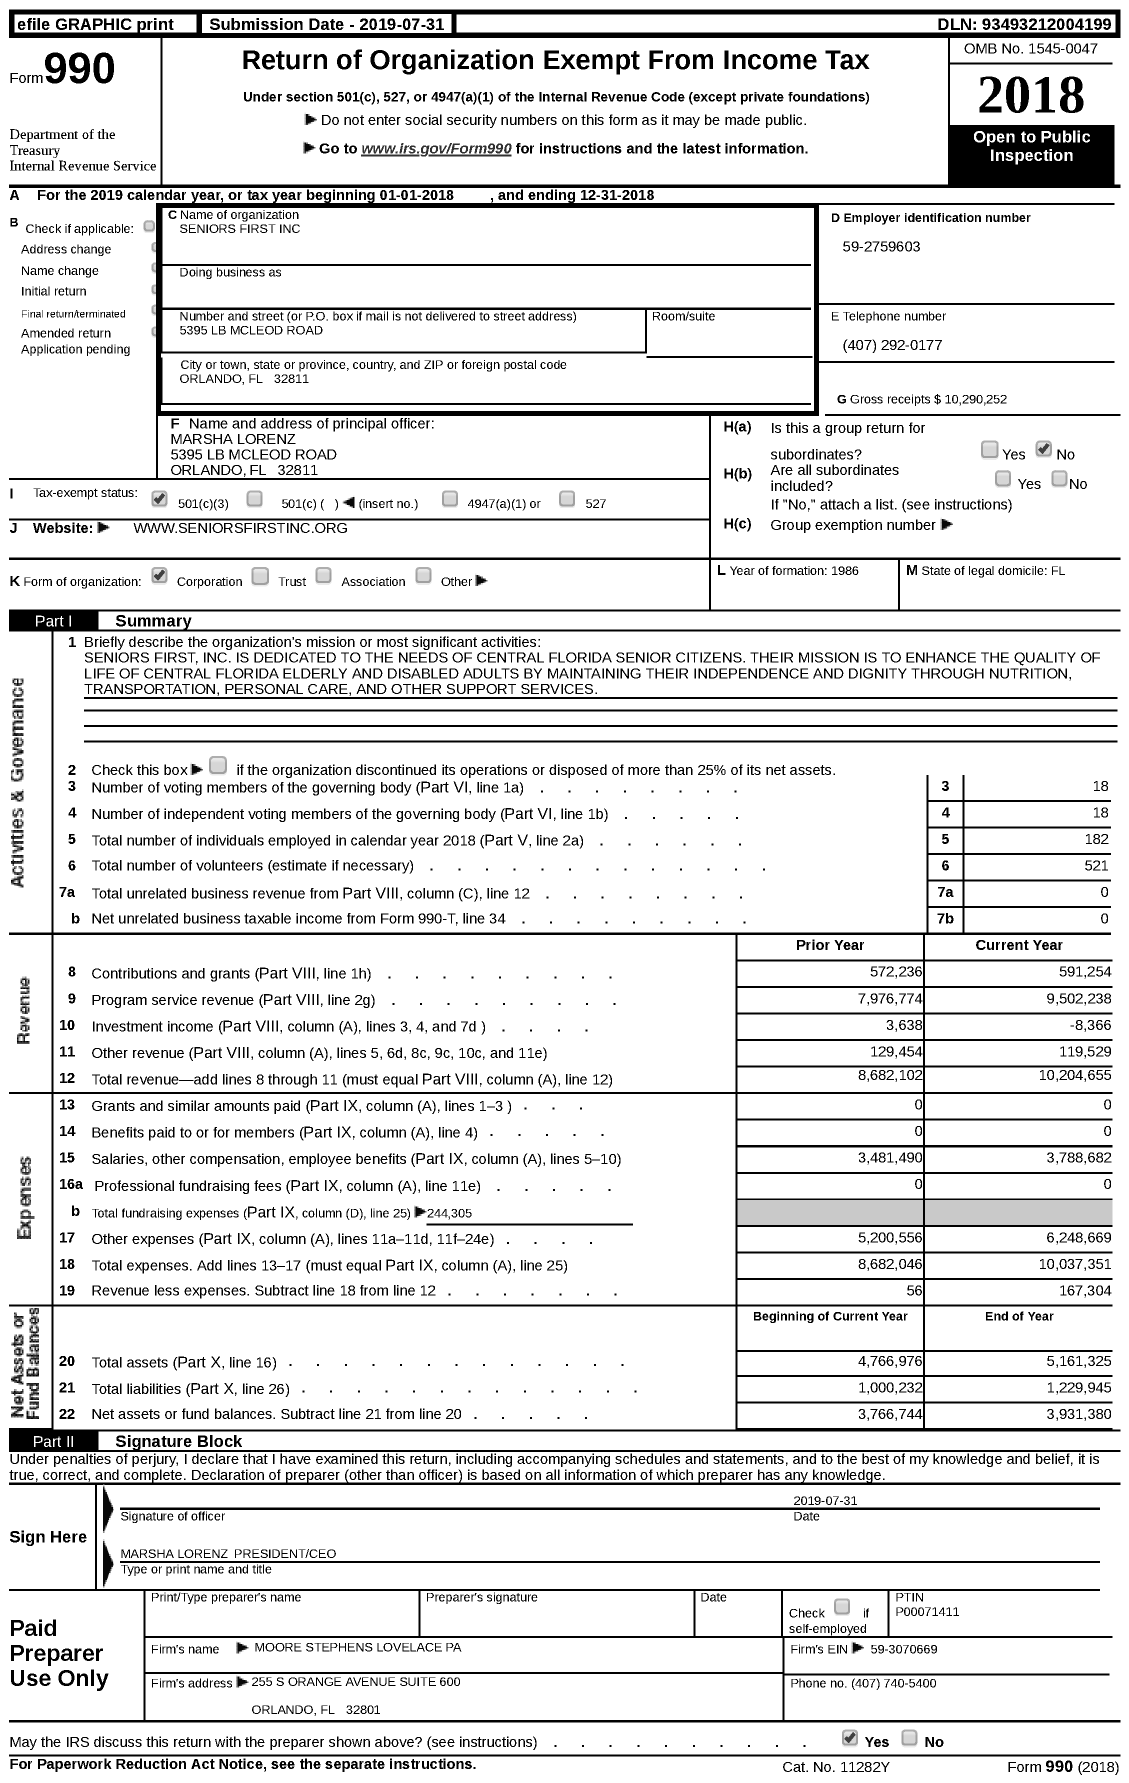 Image of first page of 2018 Form 990 for Seniors First